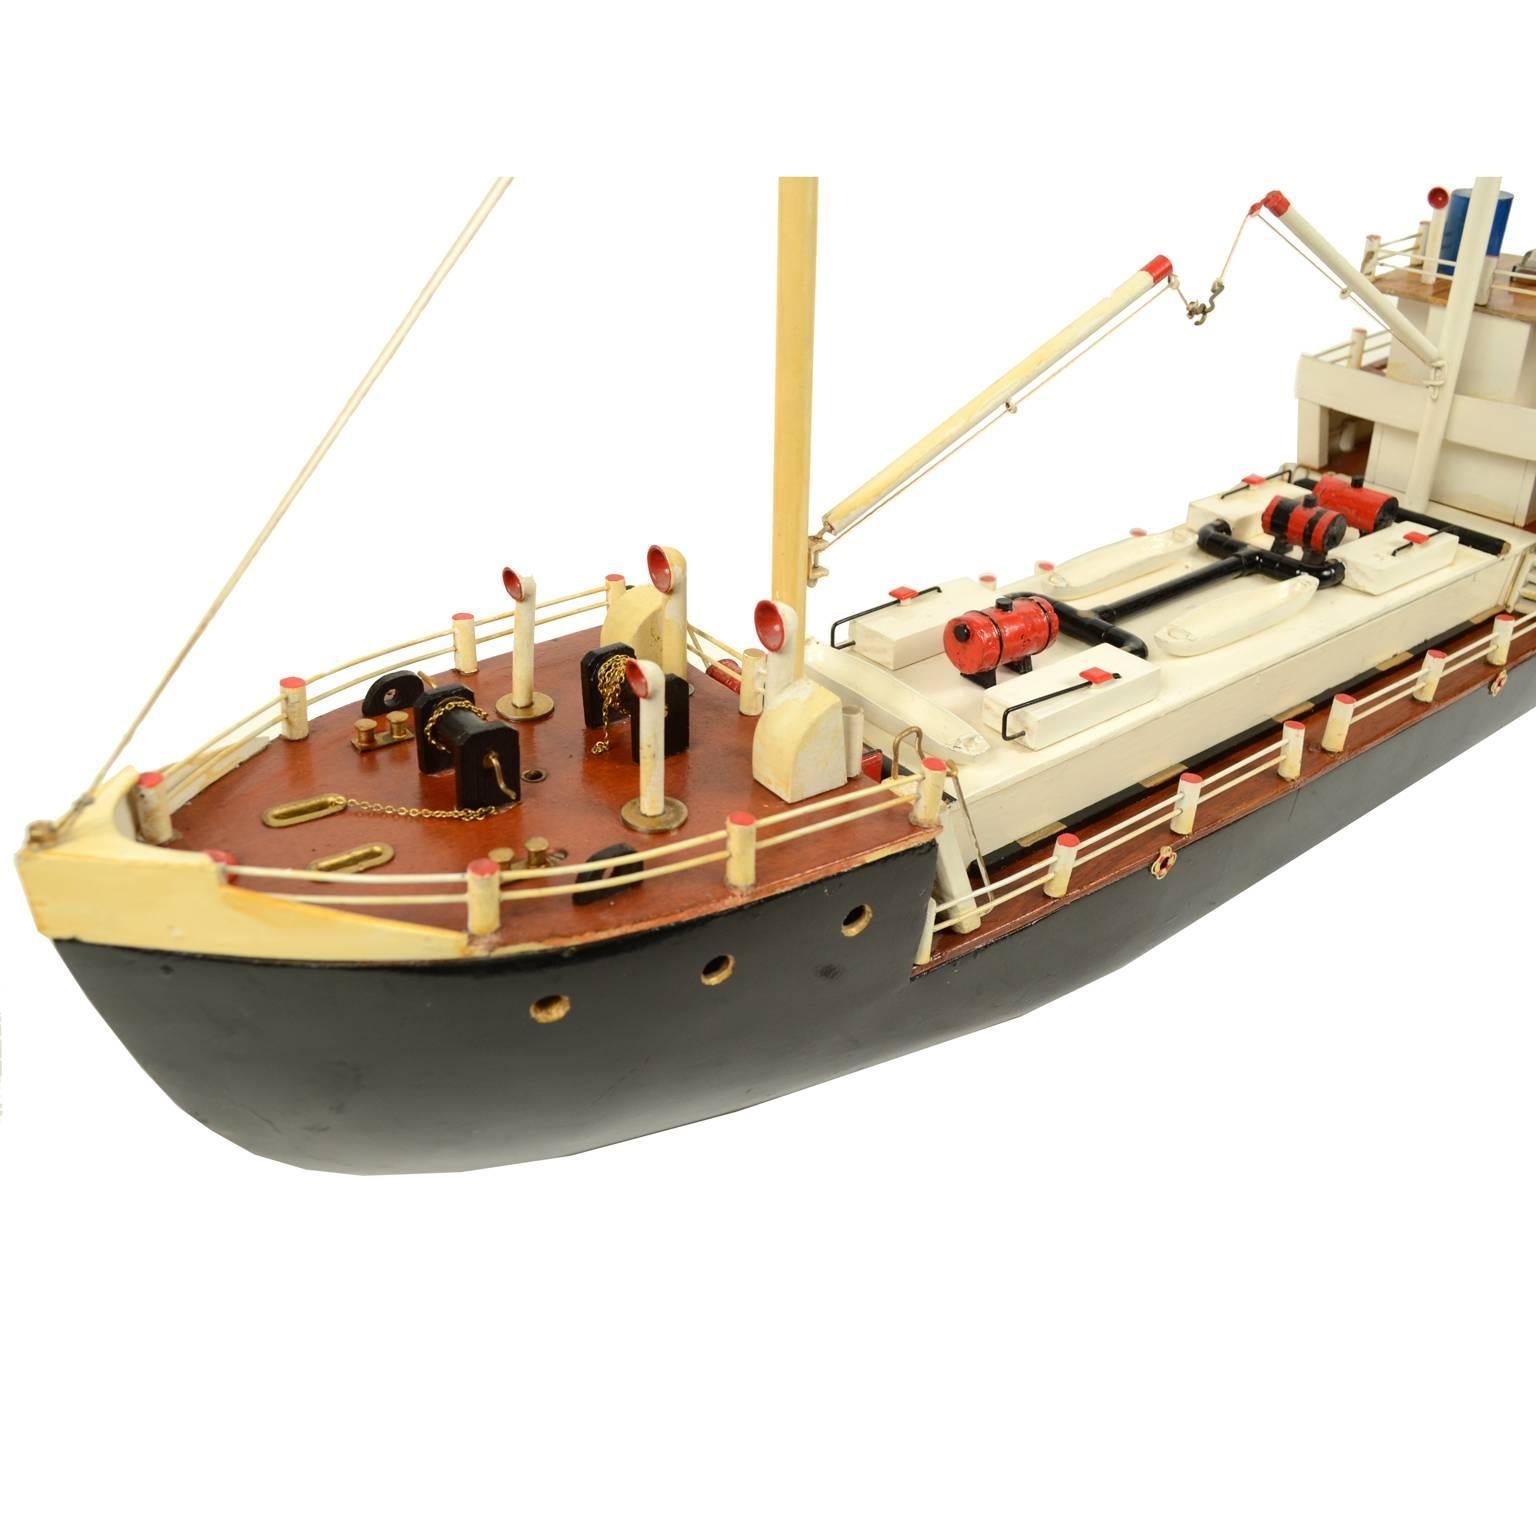 Mid-20th Century French Ship Model Made in the 1950s